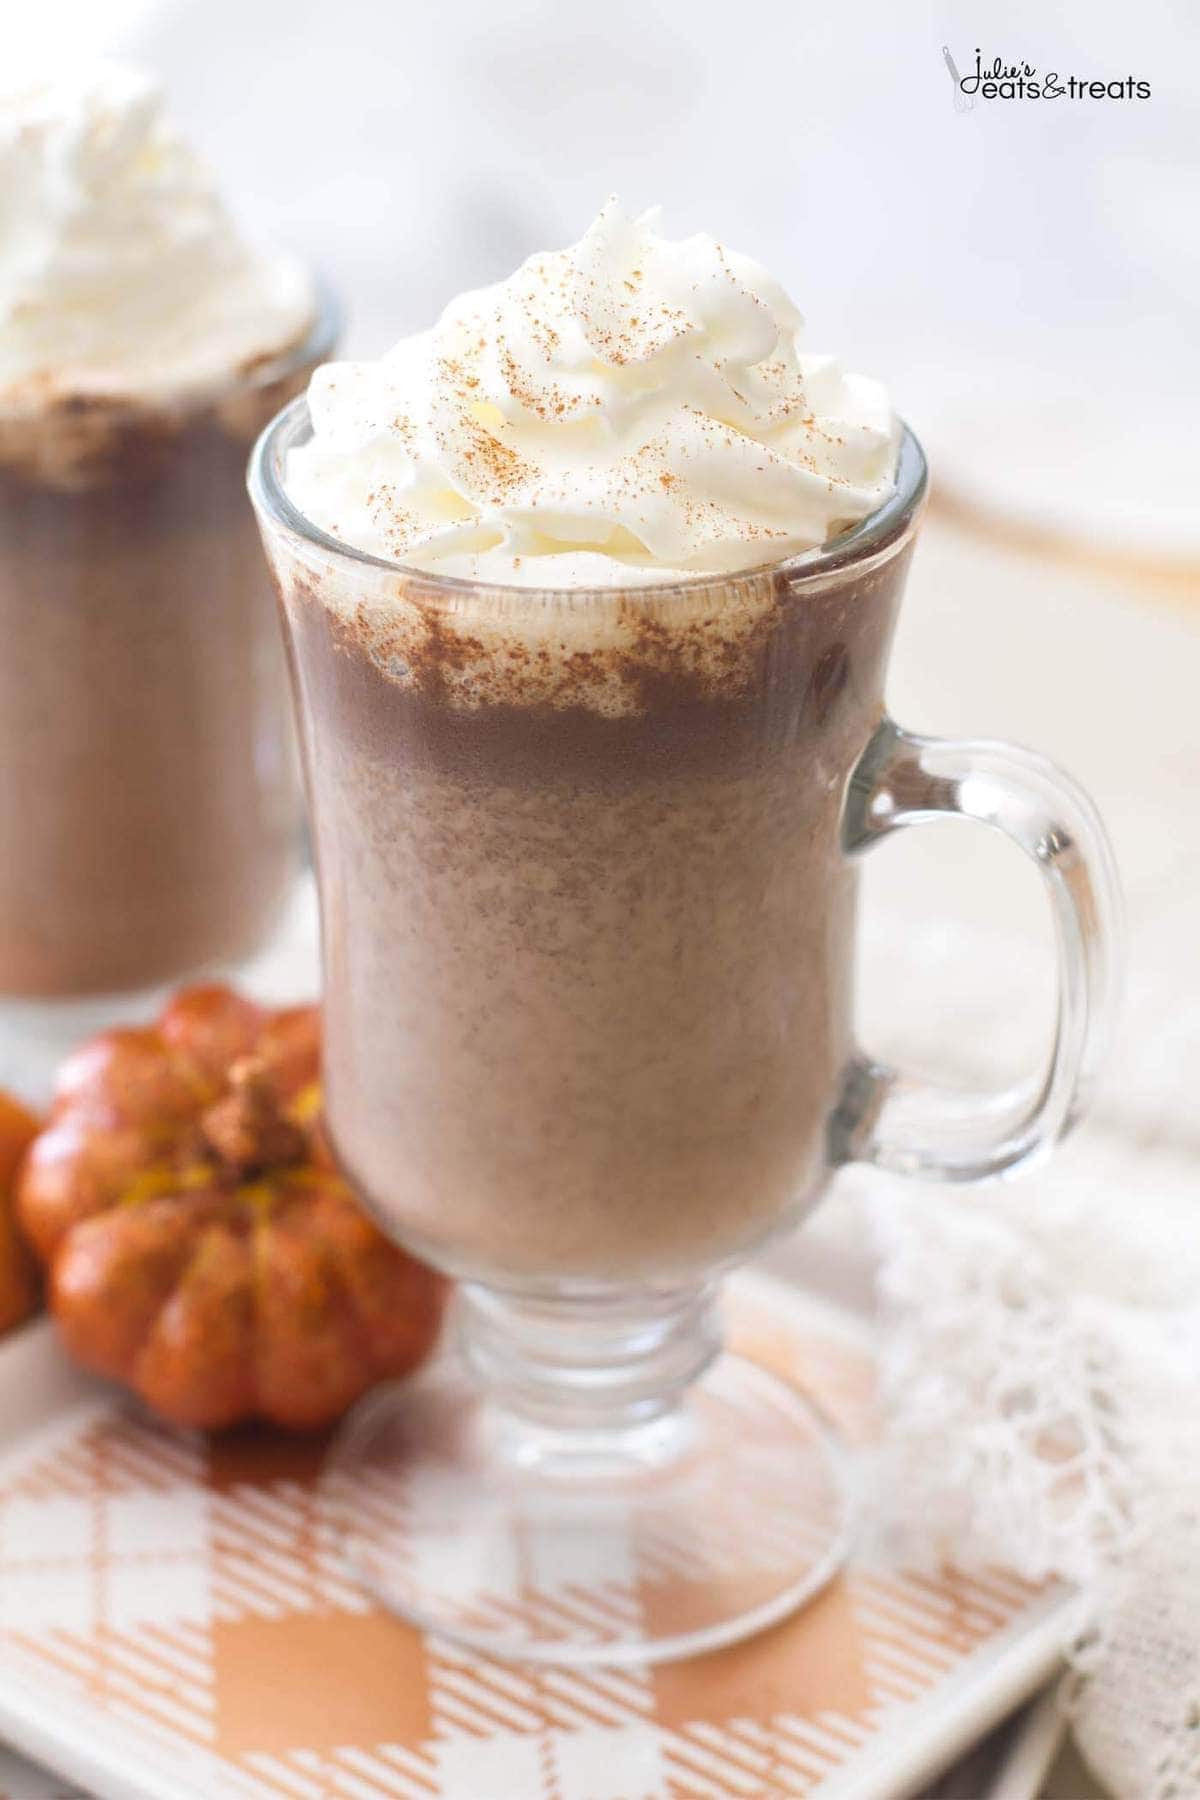 This homemade pumpkin hot chocolate recipe uses real pumpkin puree and pumpkin pie spices to add a fall spin to a classic drink!